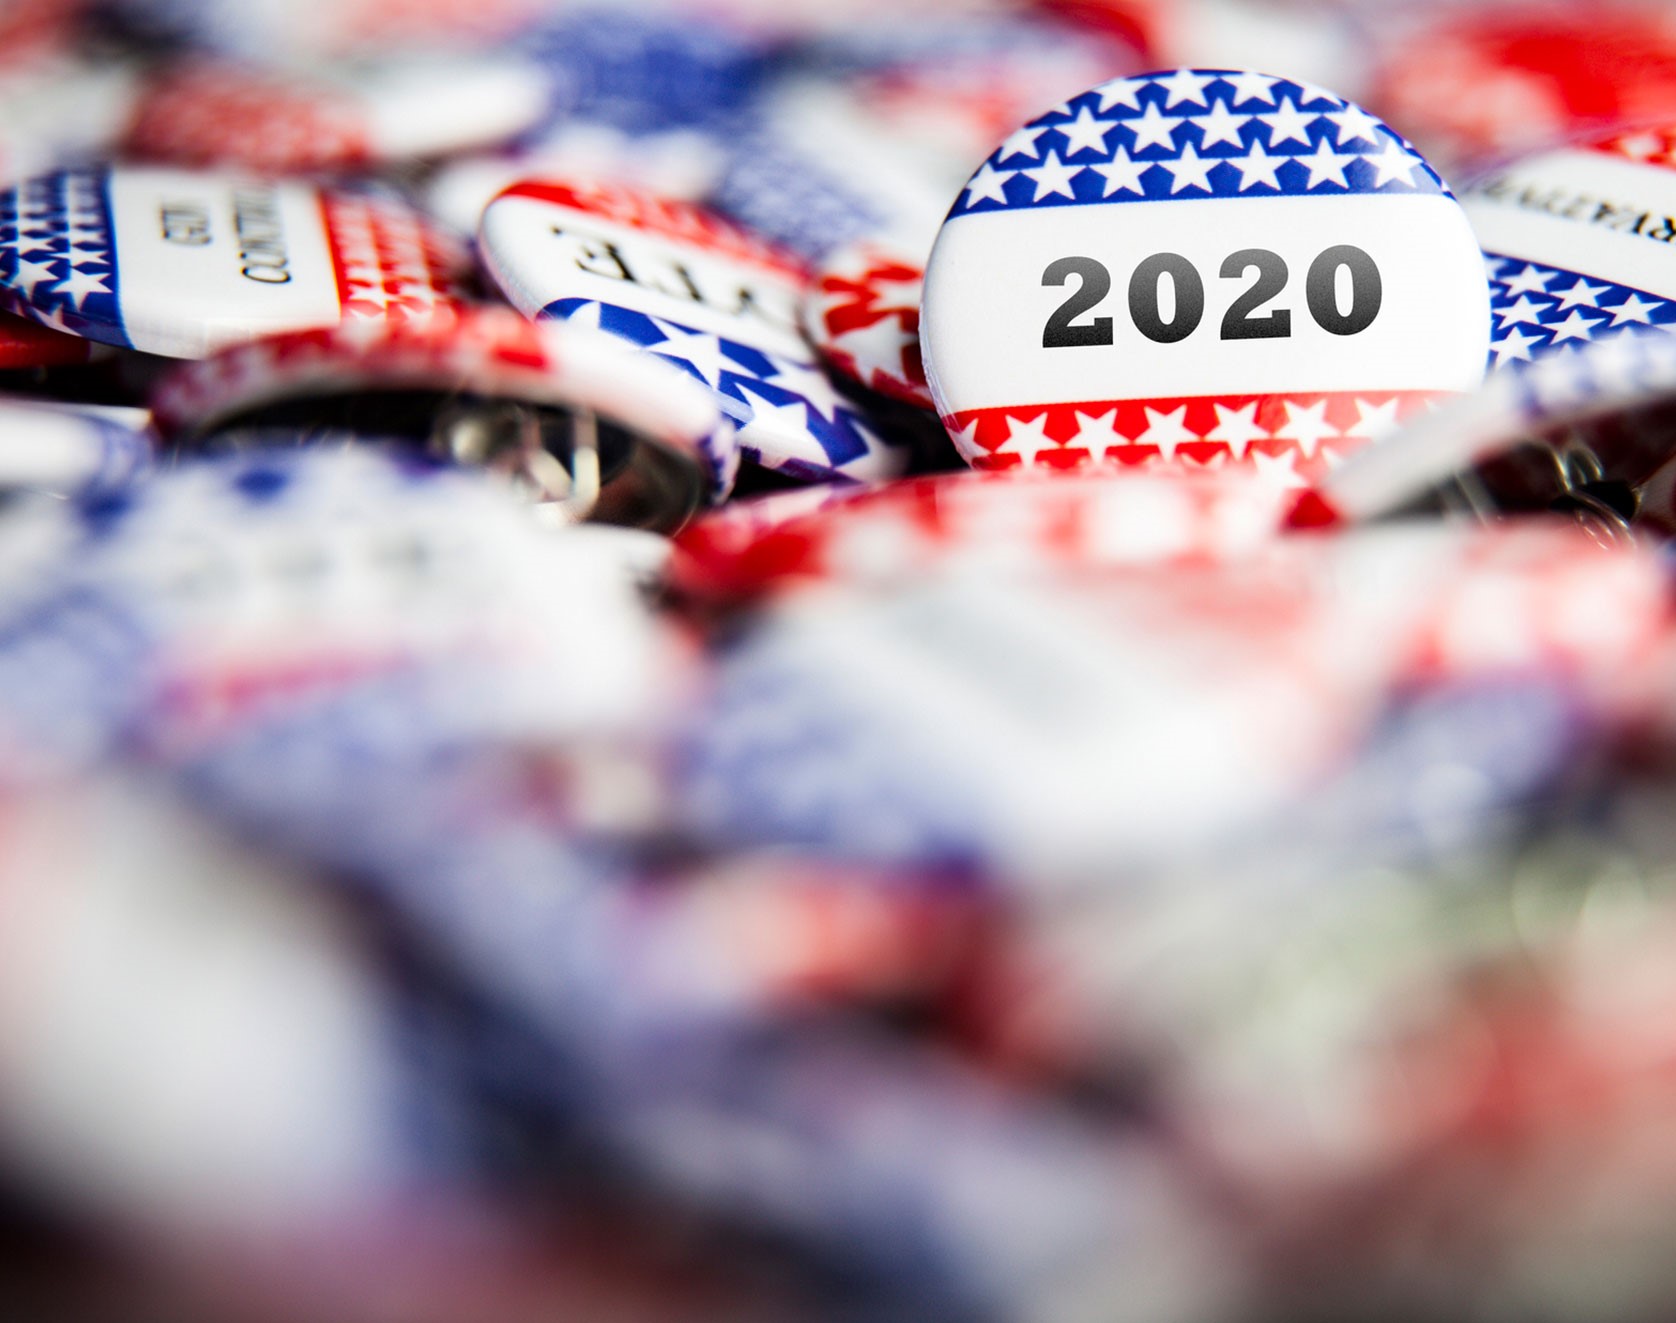 US Election 2020 buttons